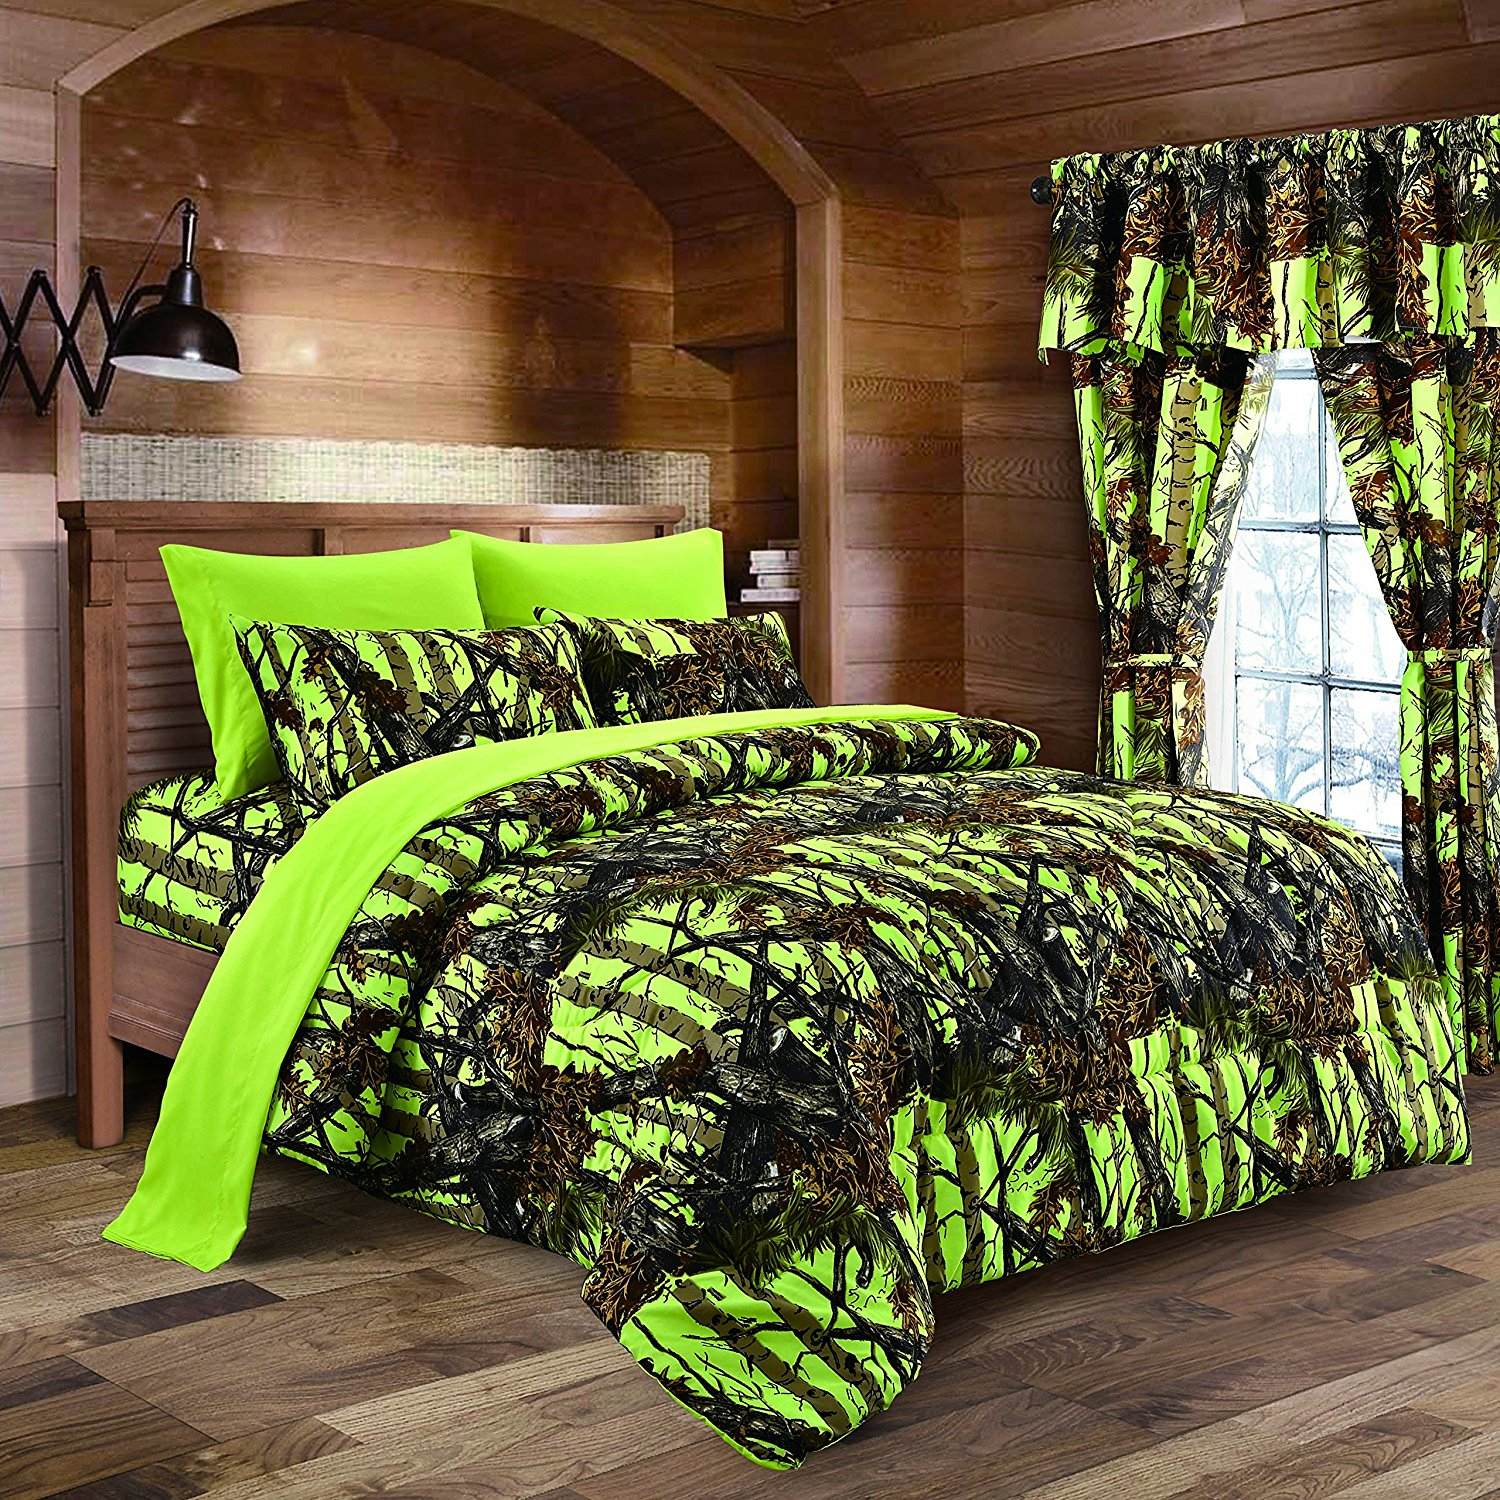 Lime Camouflage Queen Size 8pc Comforter Sheet Pillowcases And Bed Skirt Set Camo Bedding Sheet Set For Hunters Teens Boys And Girls pertaining to measurements 1500 X 1500